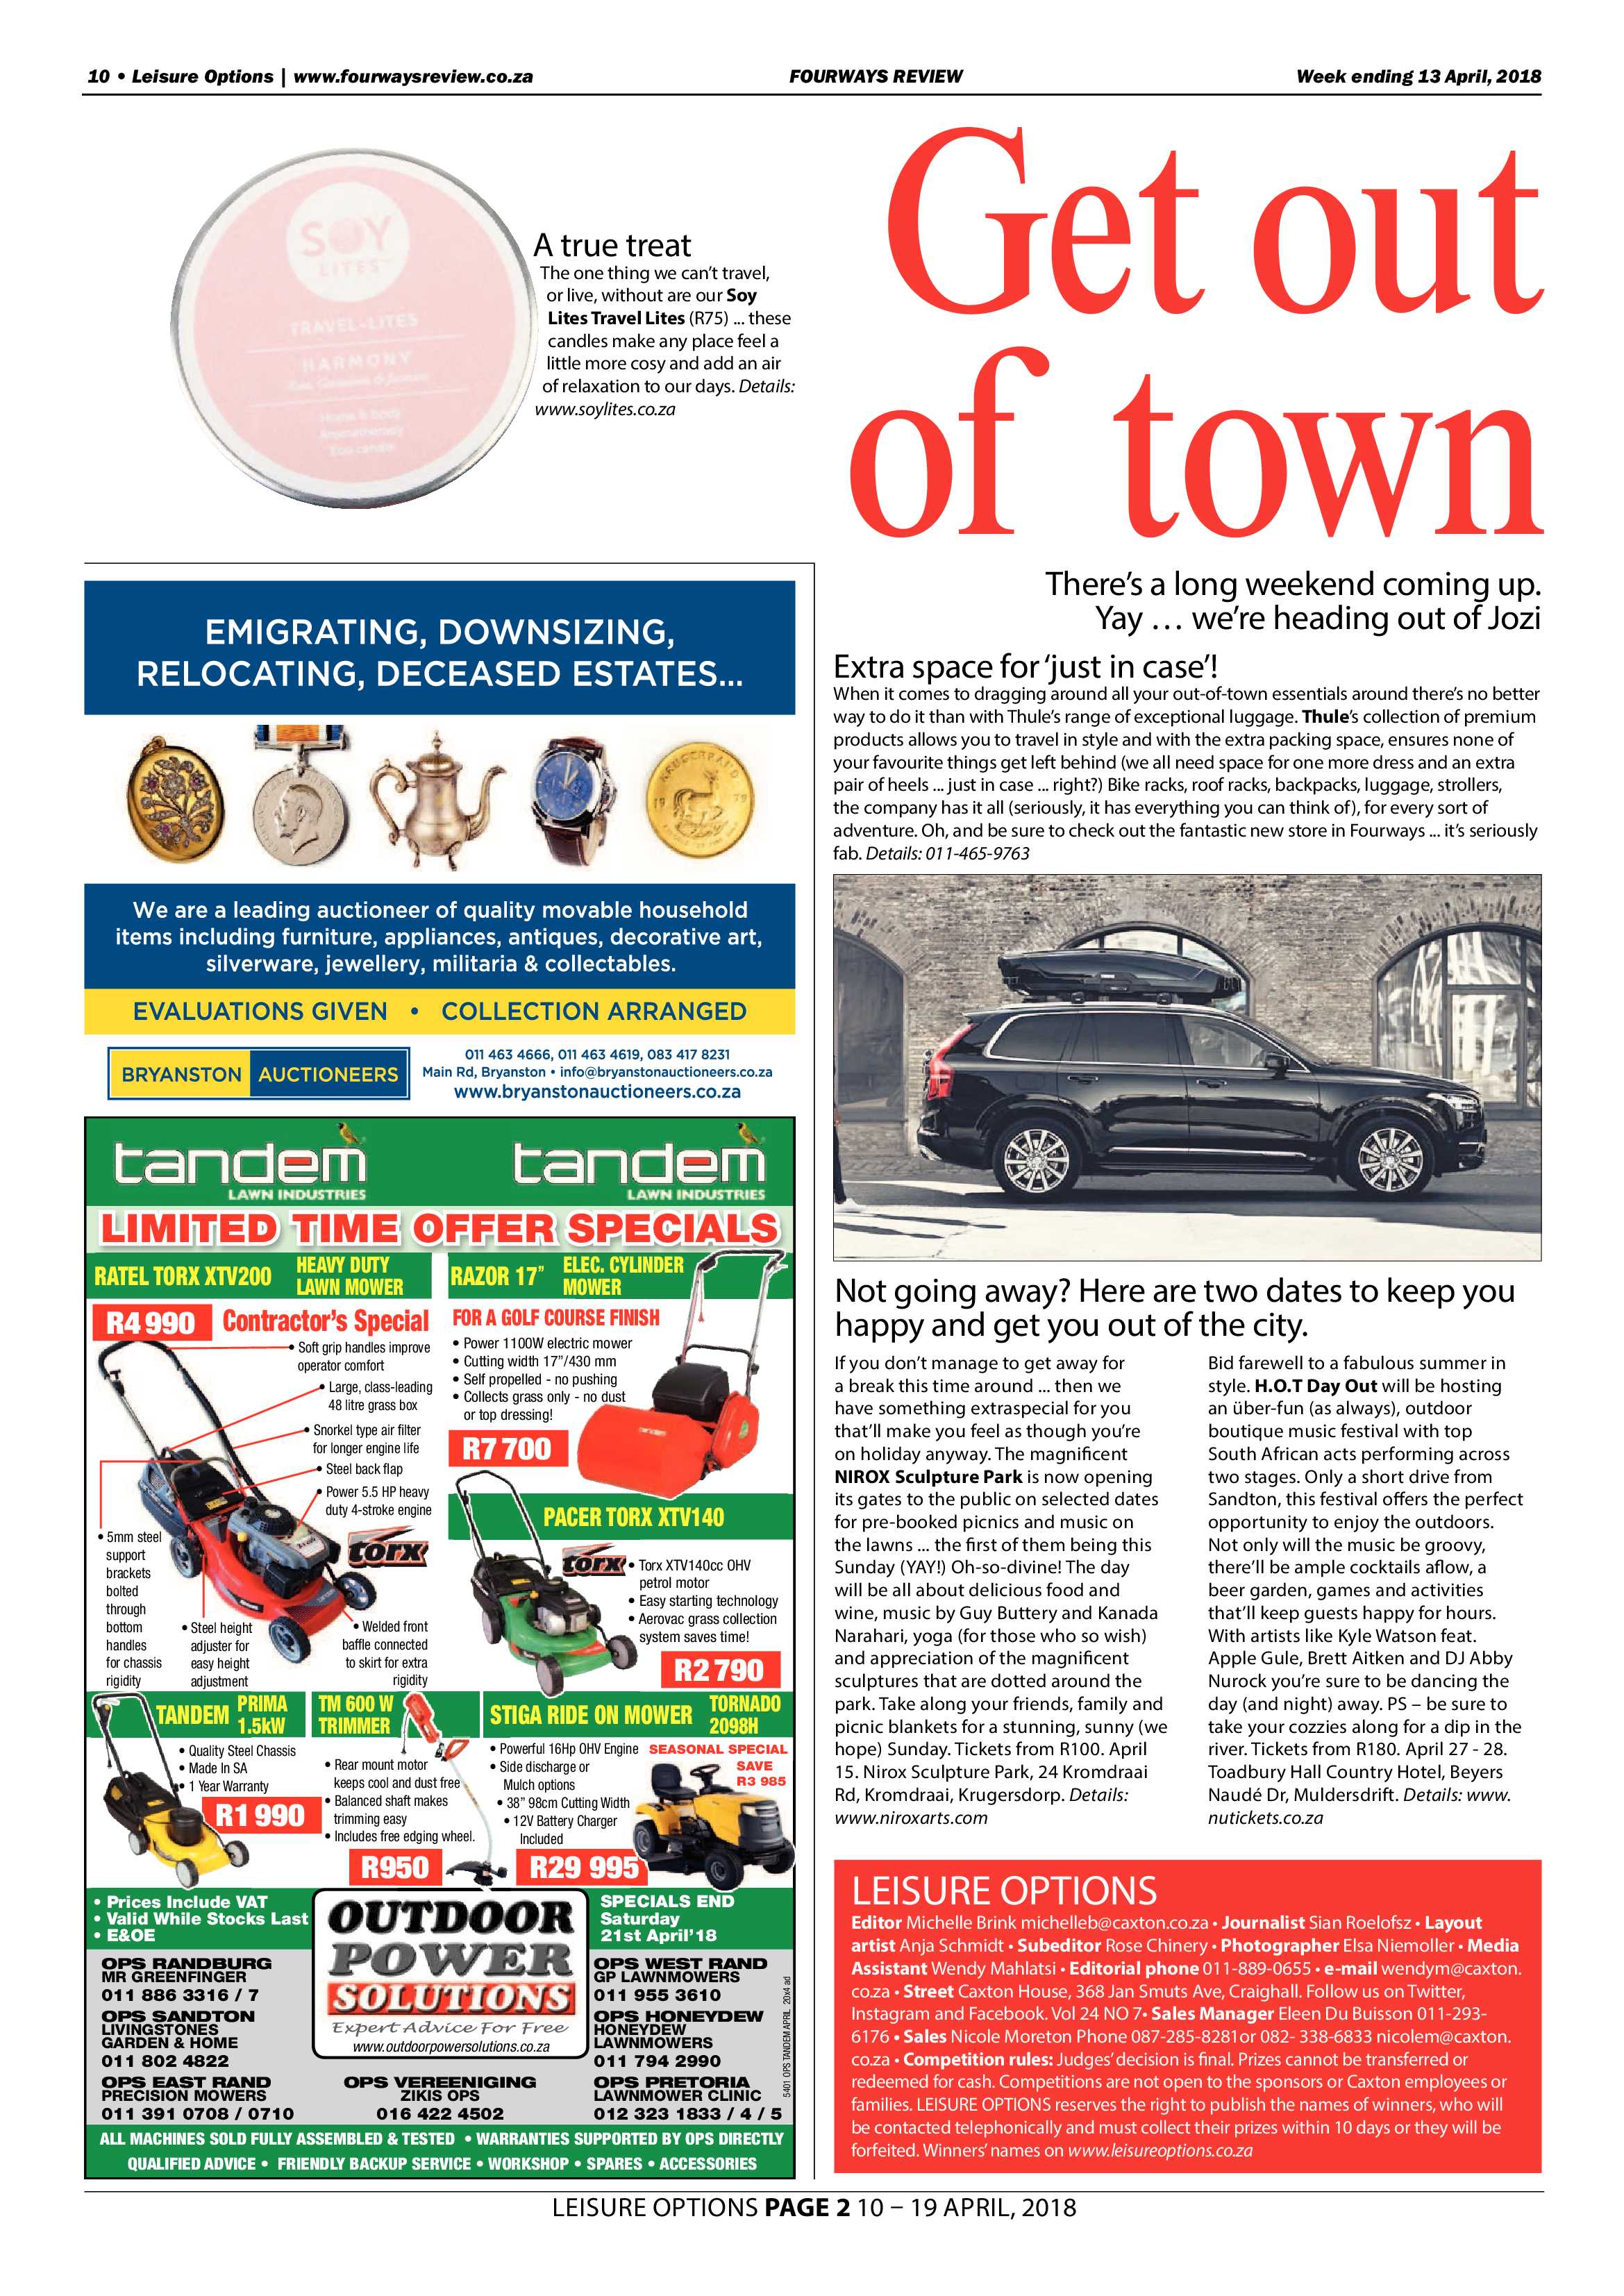 Fourways Review 13 April 2018 page 10